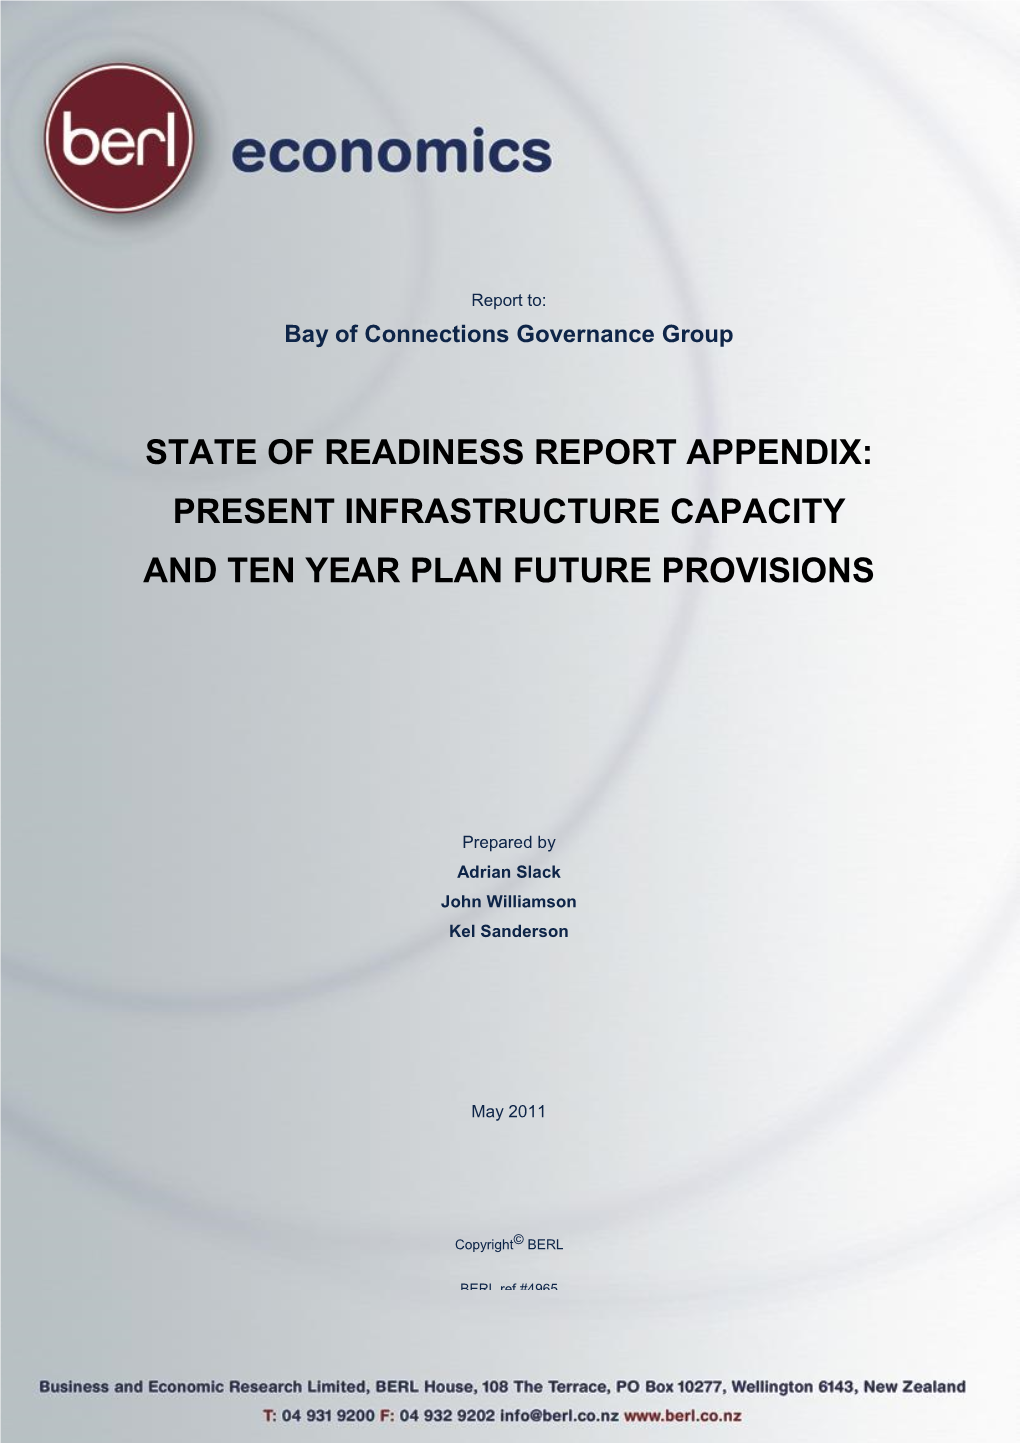 State of Readiness Report Appendix: Present Infrastructure Capacity and Ten Year Plan Future Provisions